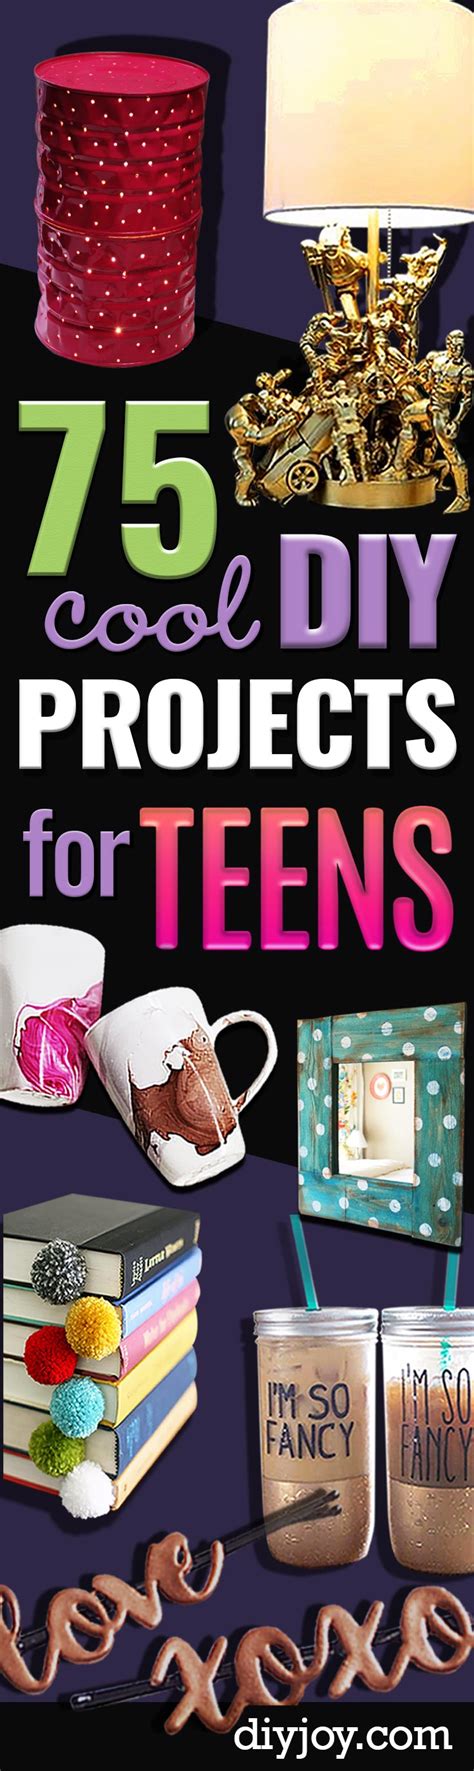 80 Creative Diy Projects For Teenagers Dyi Teen Crafts For Tweens And Teens